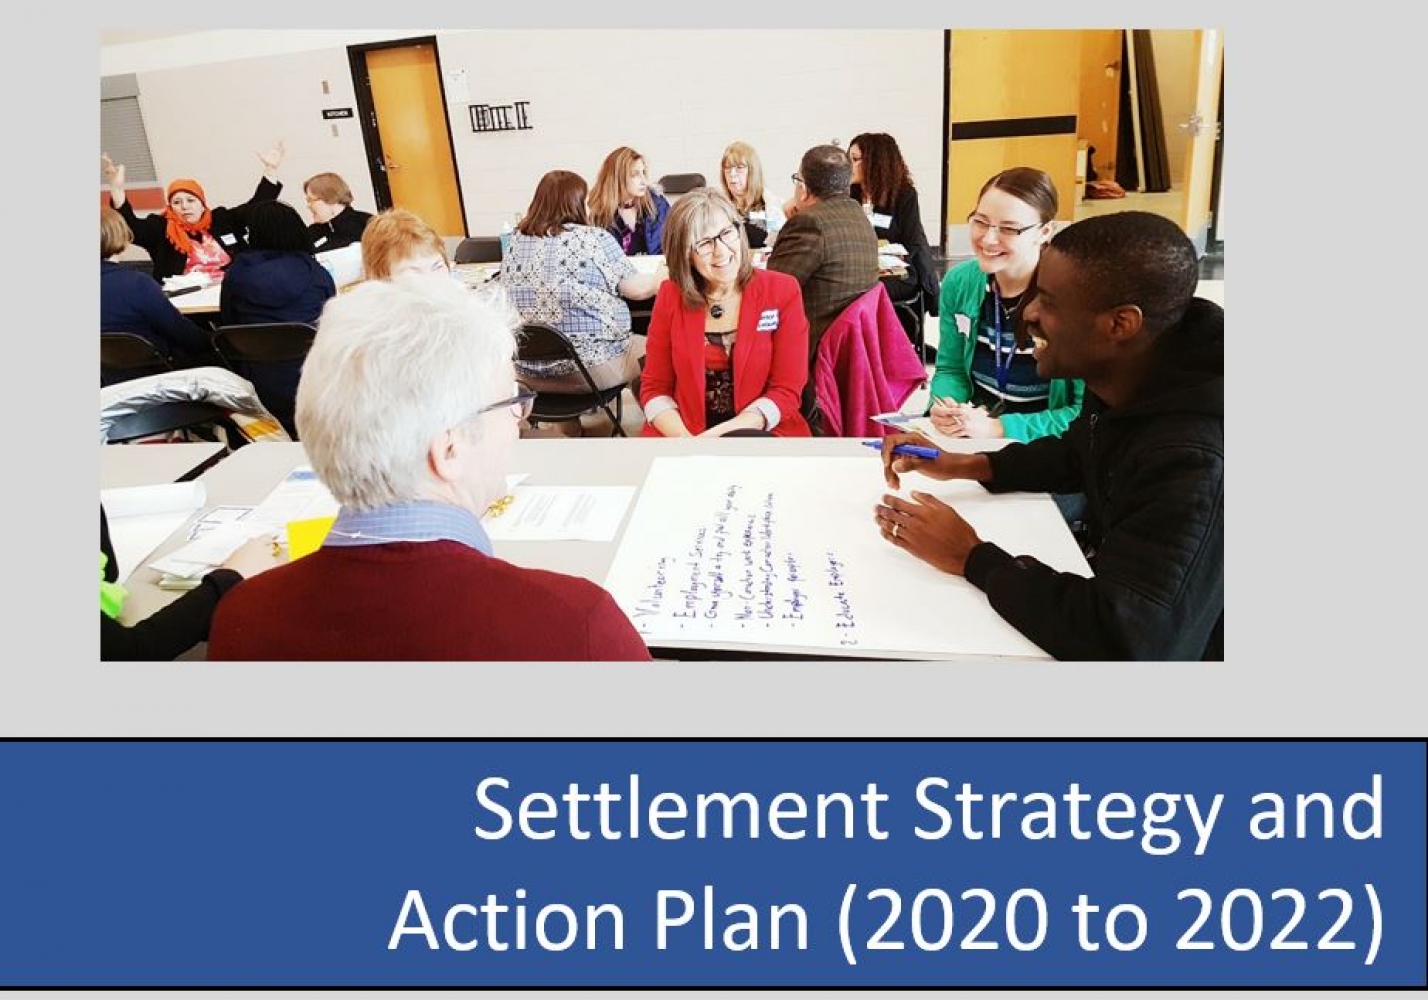 New Settlement Strategy and Action Plan for 2020-2022